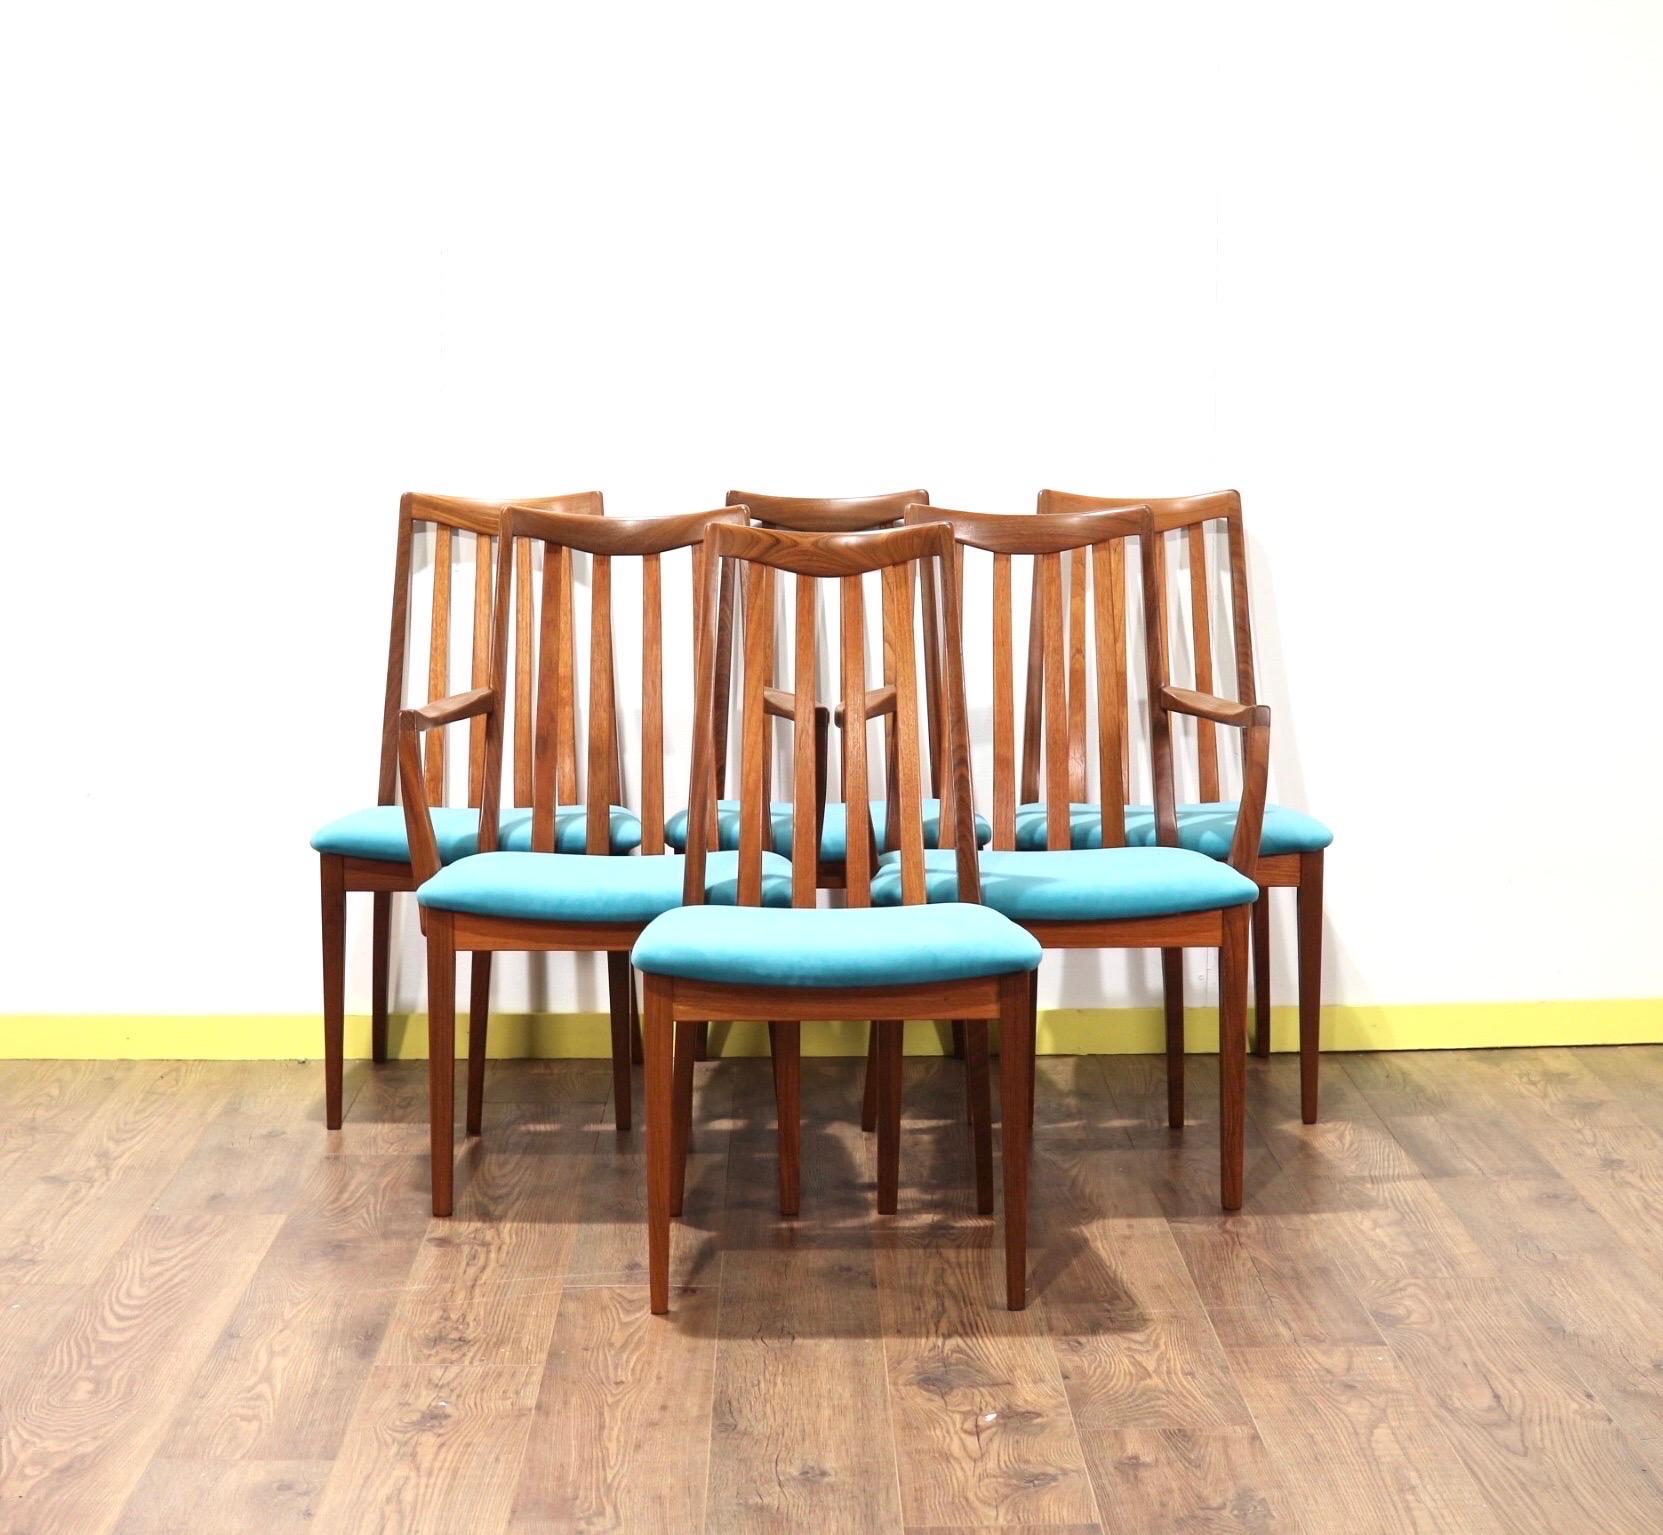 A gorgeous set of 6 G Plan teak framed dining chairs from their Brasillia range. These fabulous chairs have had the seat pads recently upholstored in teal to give them a really striking look. They would look great in any dining room.

